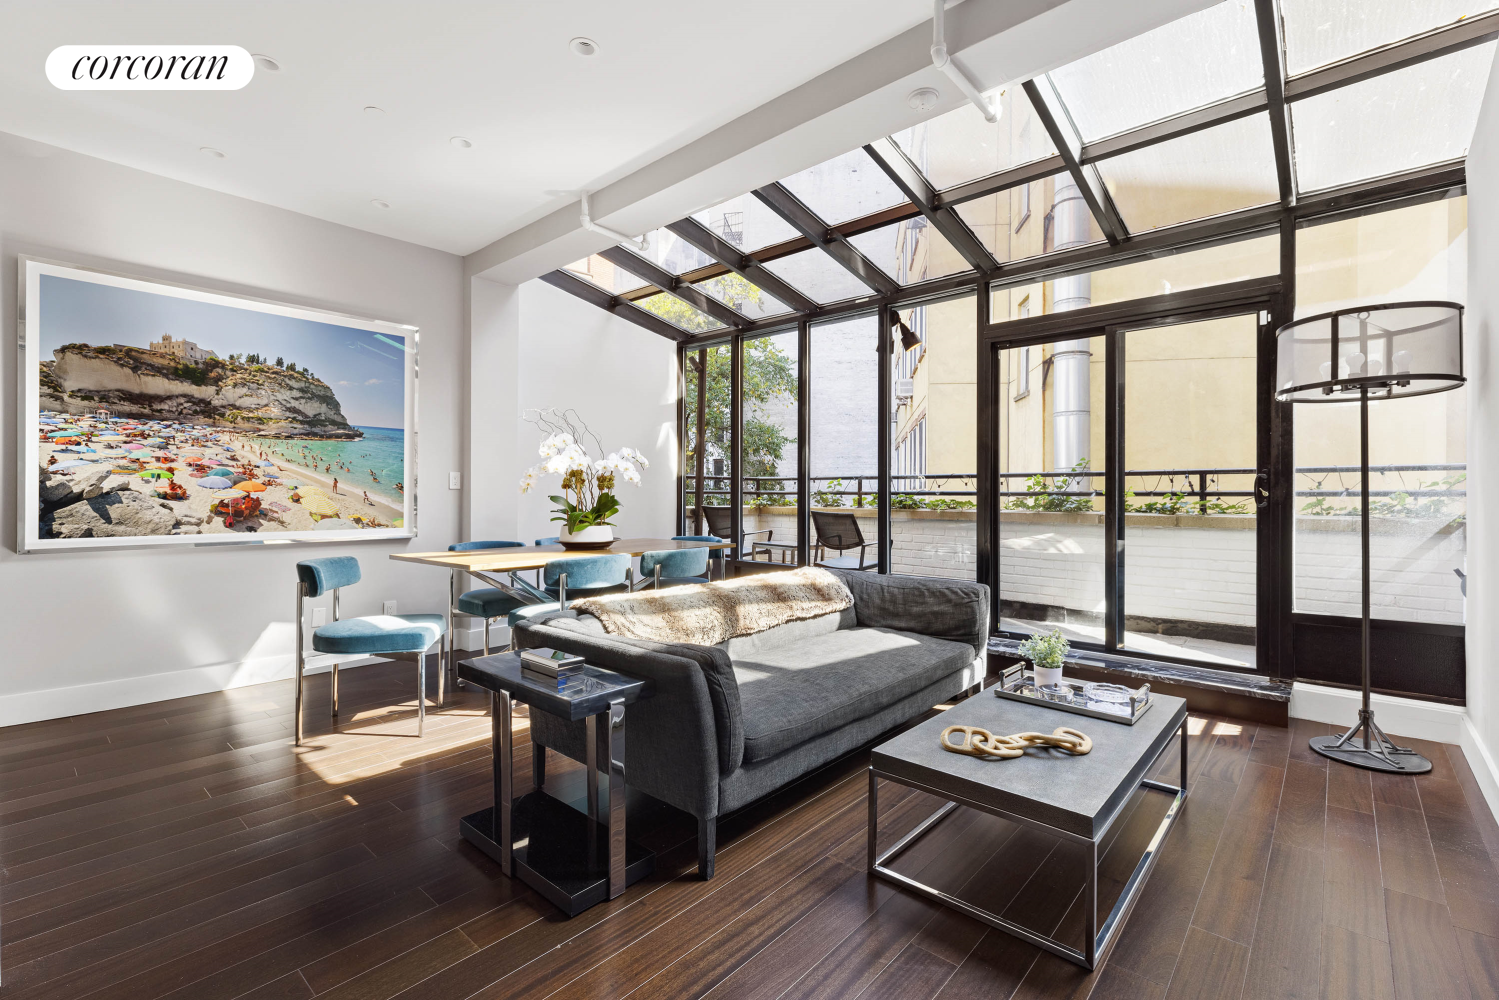 206 1st Avenue 2ndfl/1B, East Village, Downtown, NYC - 1 Bedrooms  
1.5 Bathrooms  
3 Rooms - 